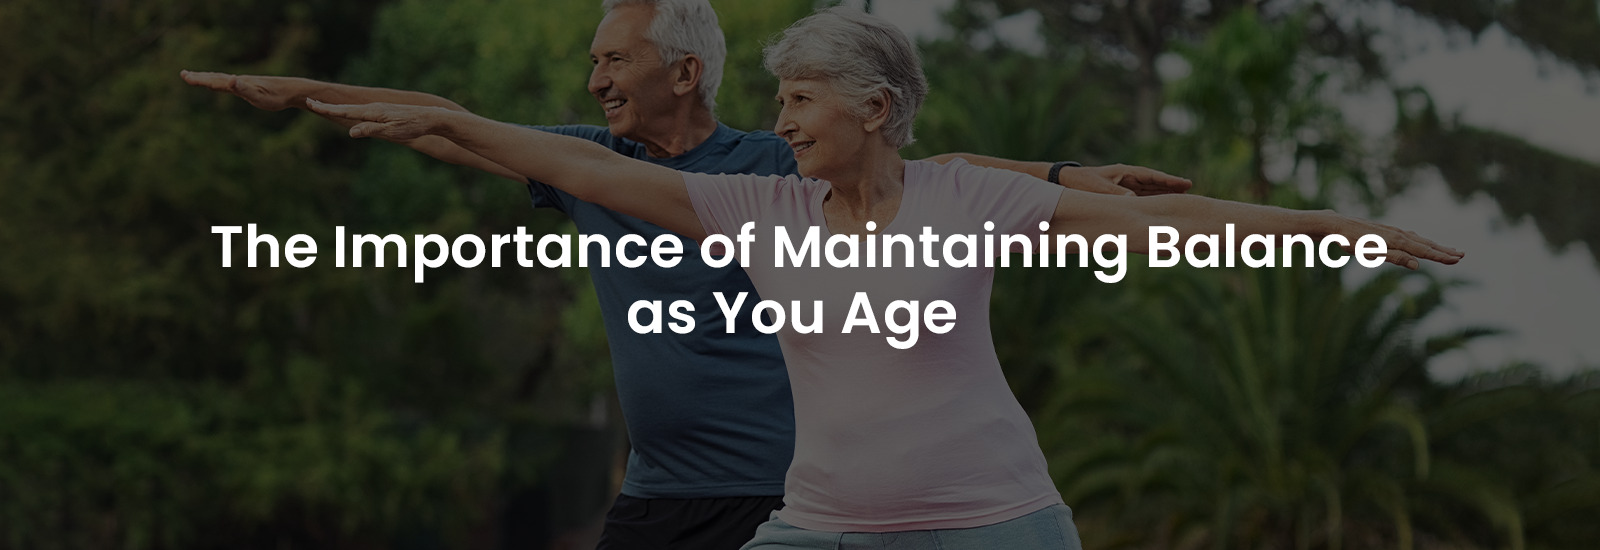 Importance of Maintaining Balance as you Age | Banner Image